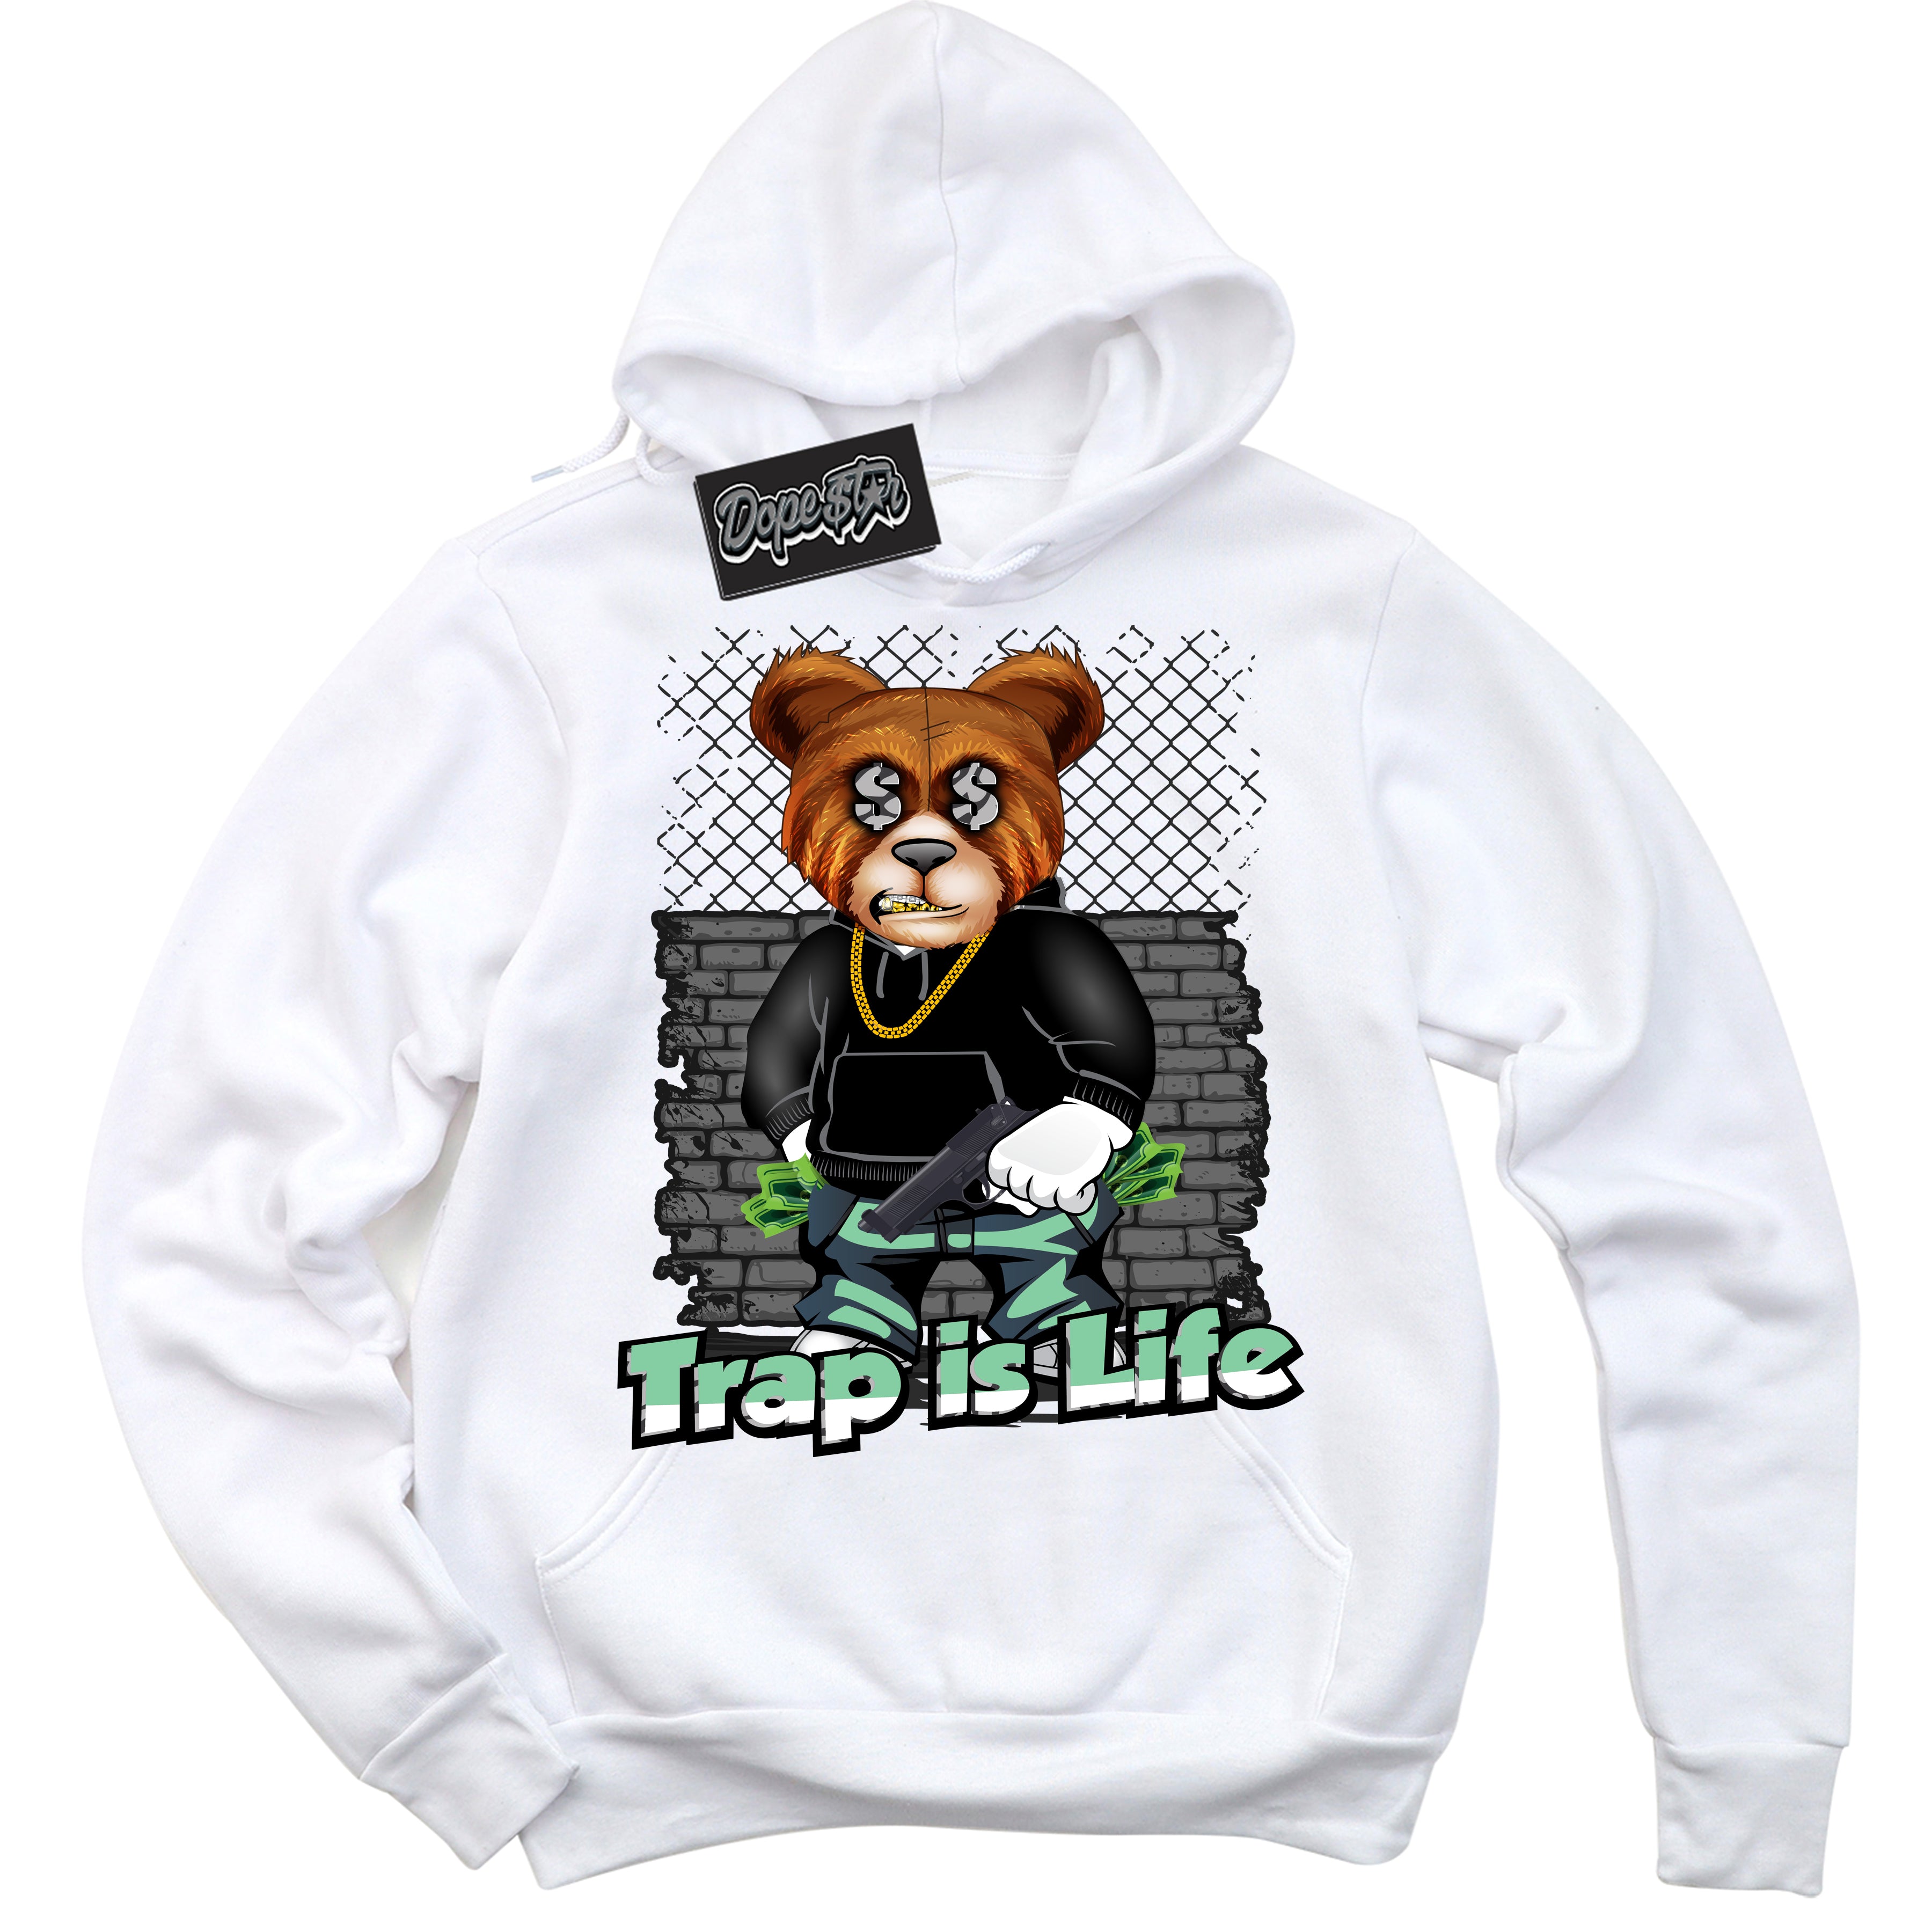 Cool White Graphic DopeStar Hoodie with “ Trap Is Life “ print, that perfectly matches Green Glow 3s sneakers